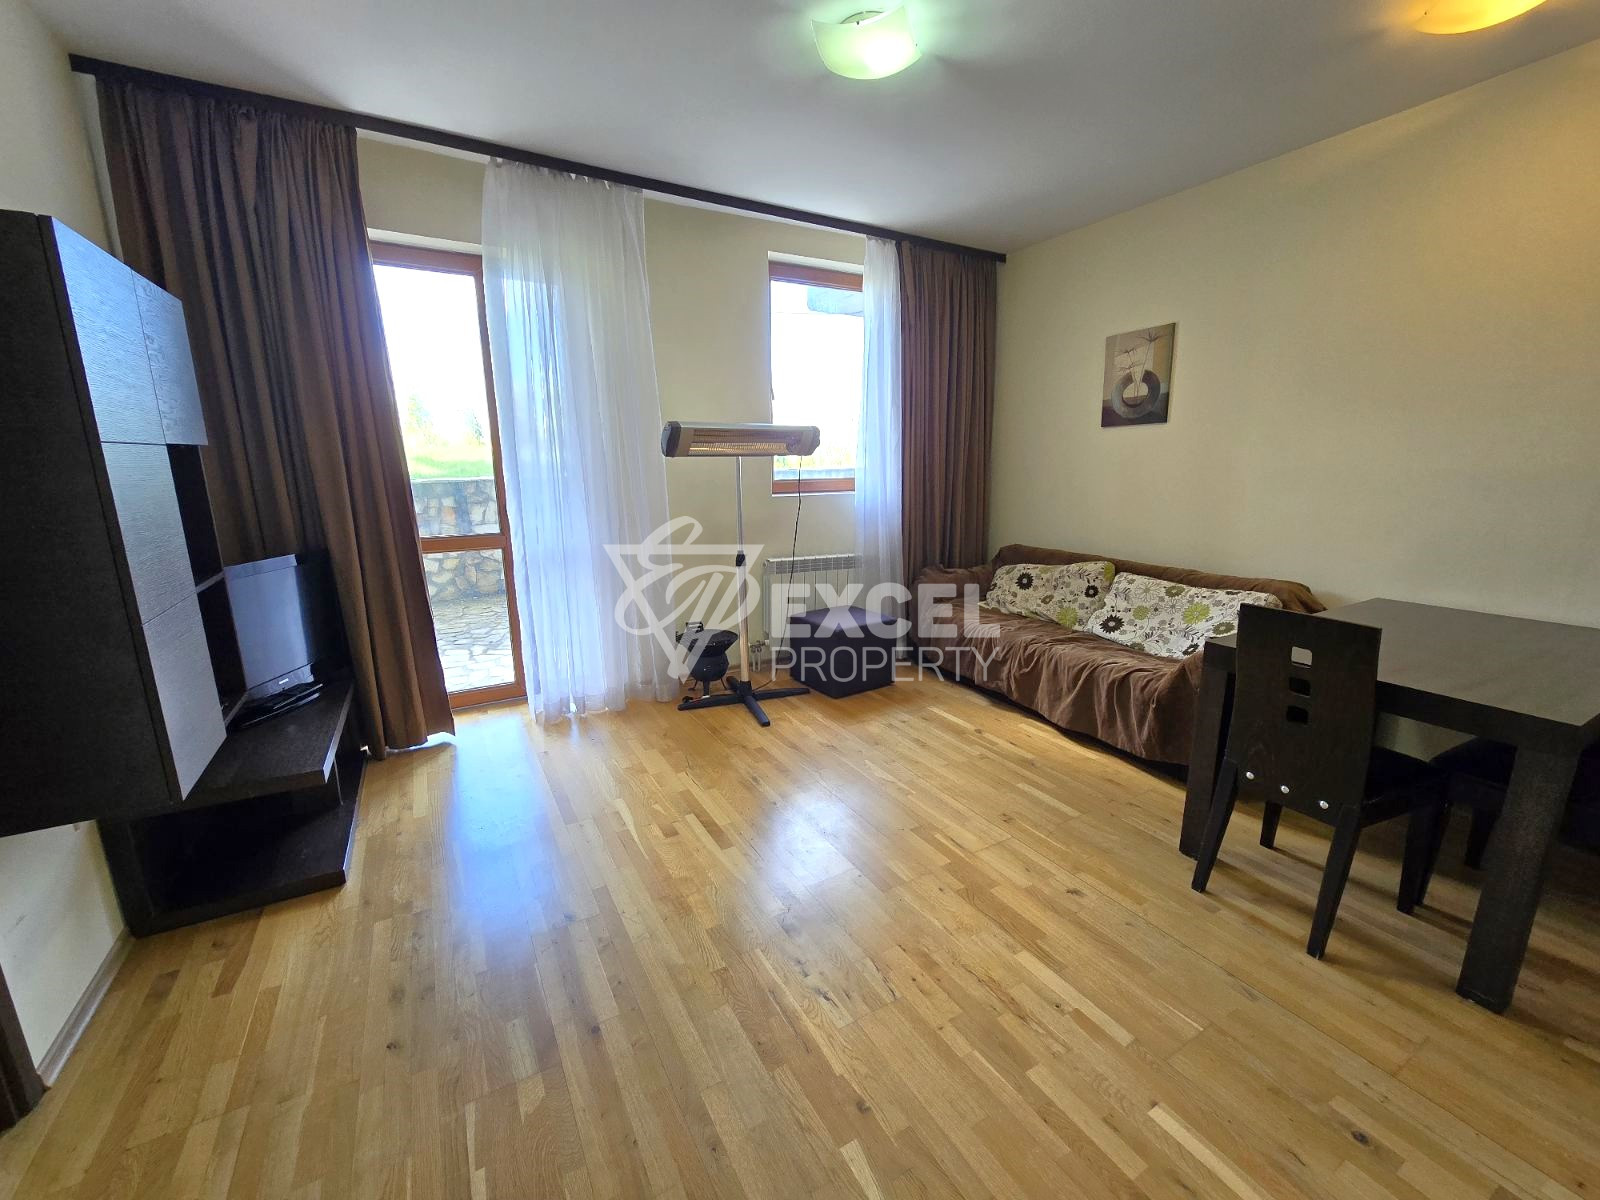 One-bedroom apartment on the ground floor for sale in the All Seasons Club complex, Bansko